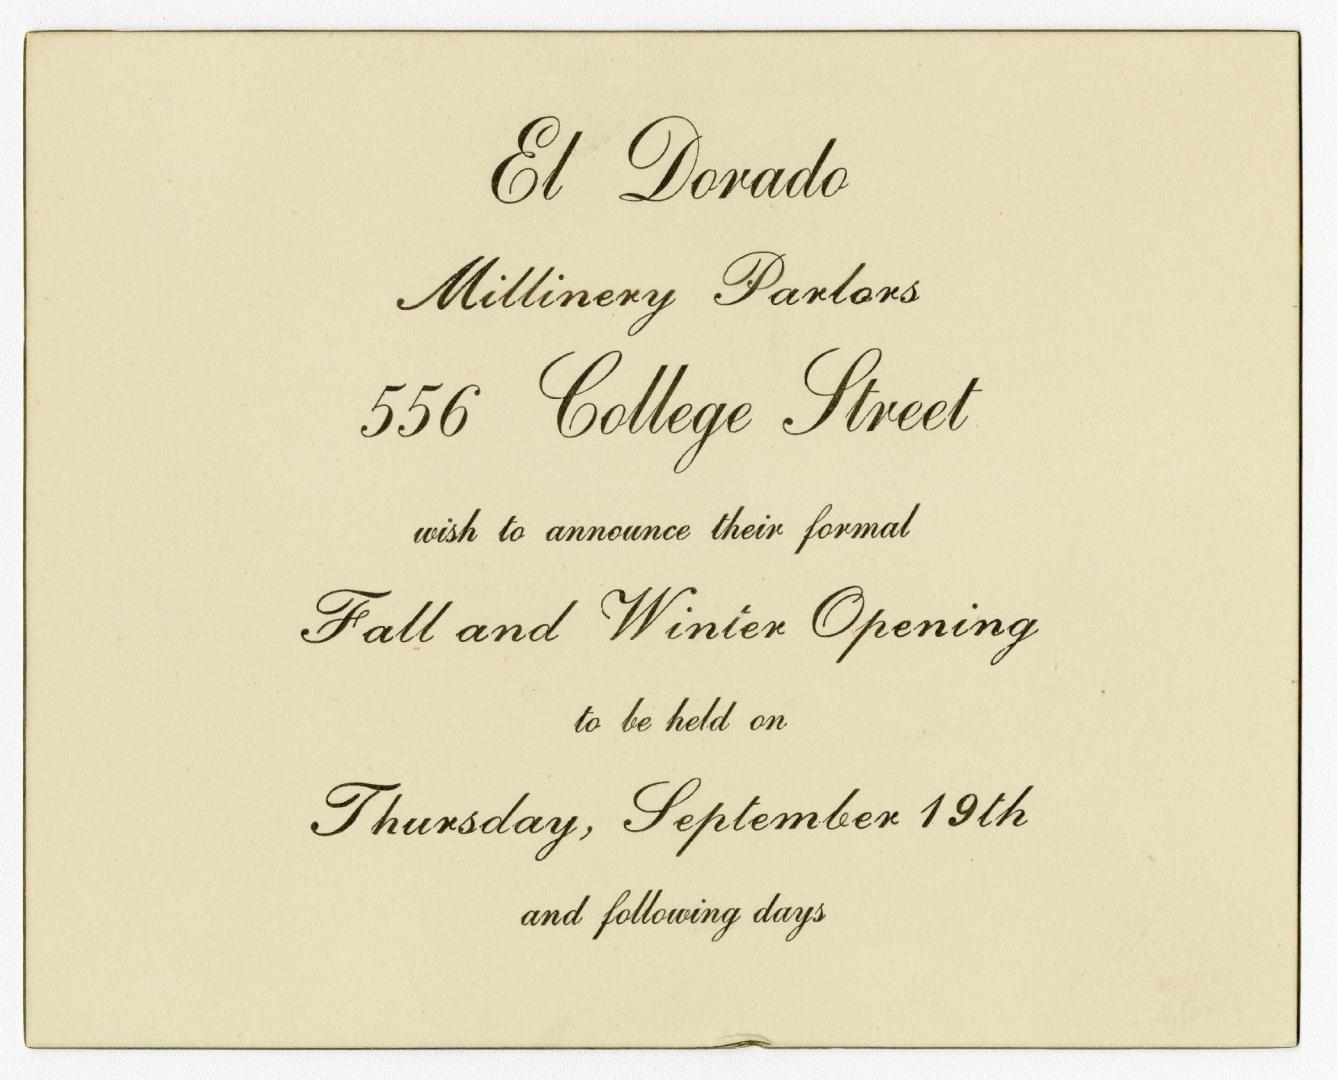 El Dorado Millinery Parlors, 556 College Street, wish to annouce their formal fall and winter opening to be held on Thursday, September 19th and following days